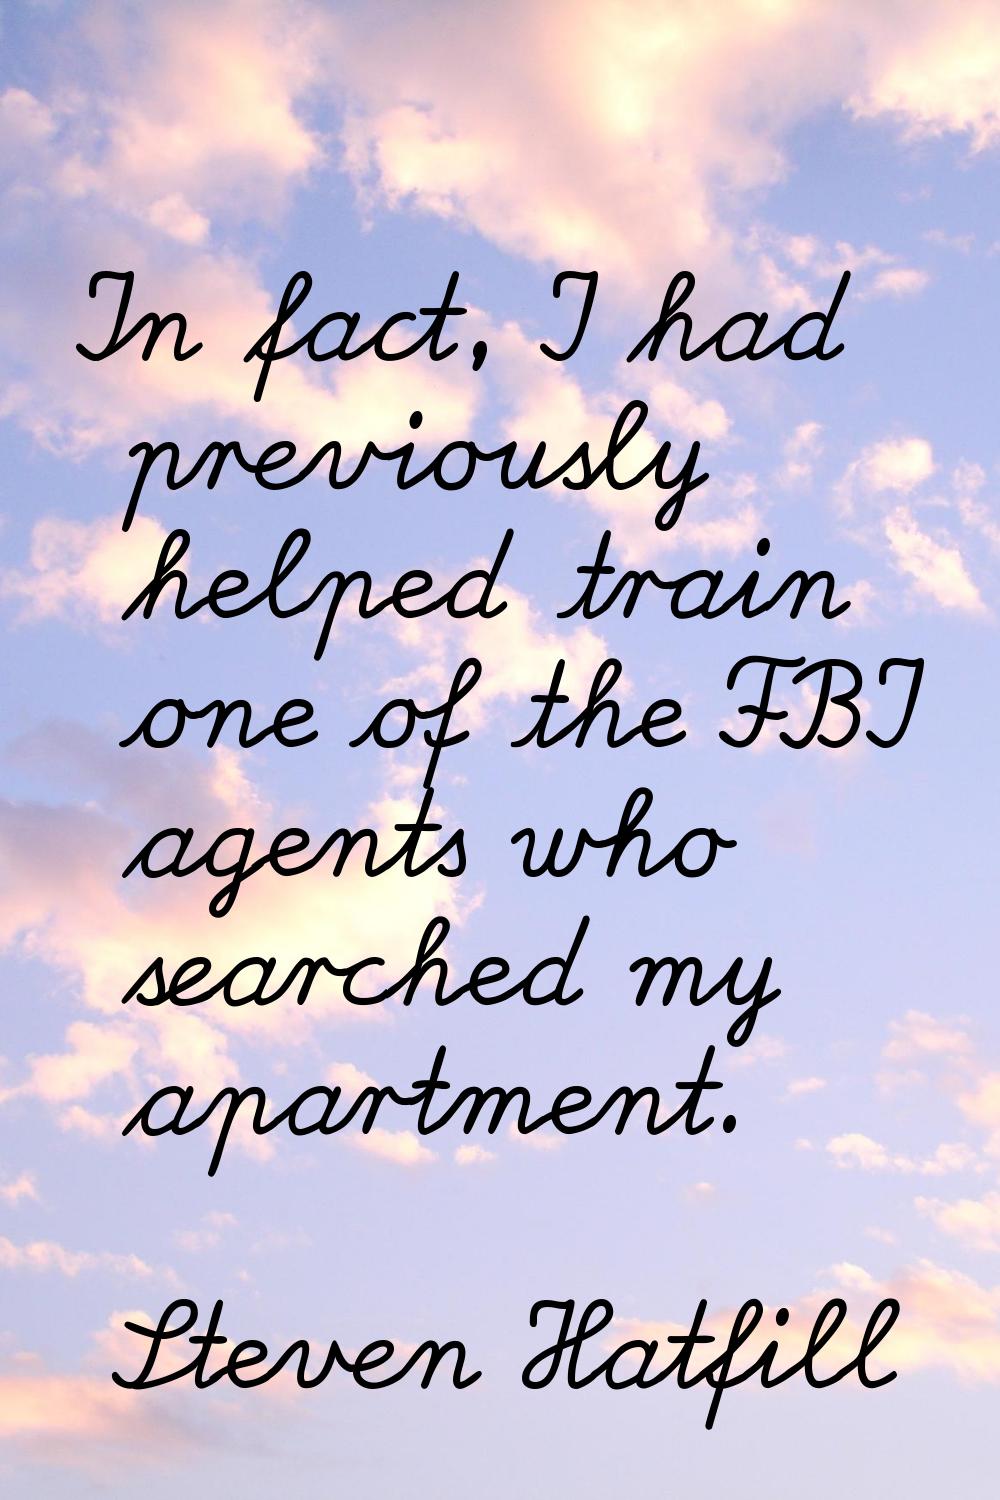 In fact, I had previously helped train one of the FBI agents who searched my apartment.